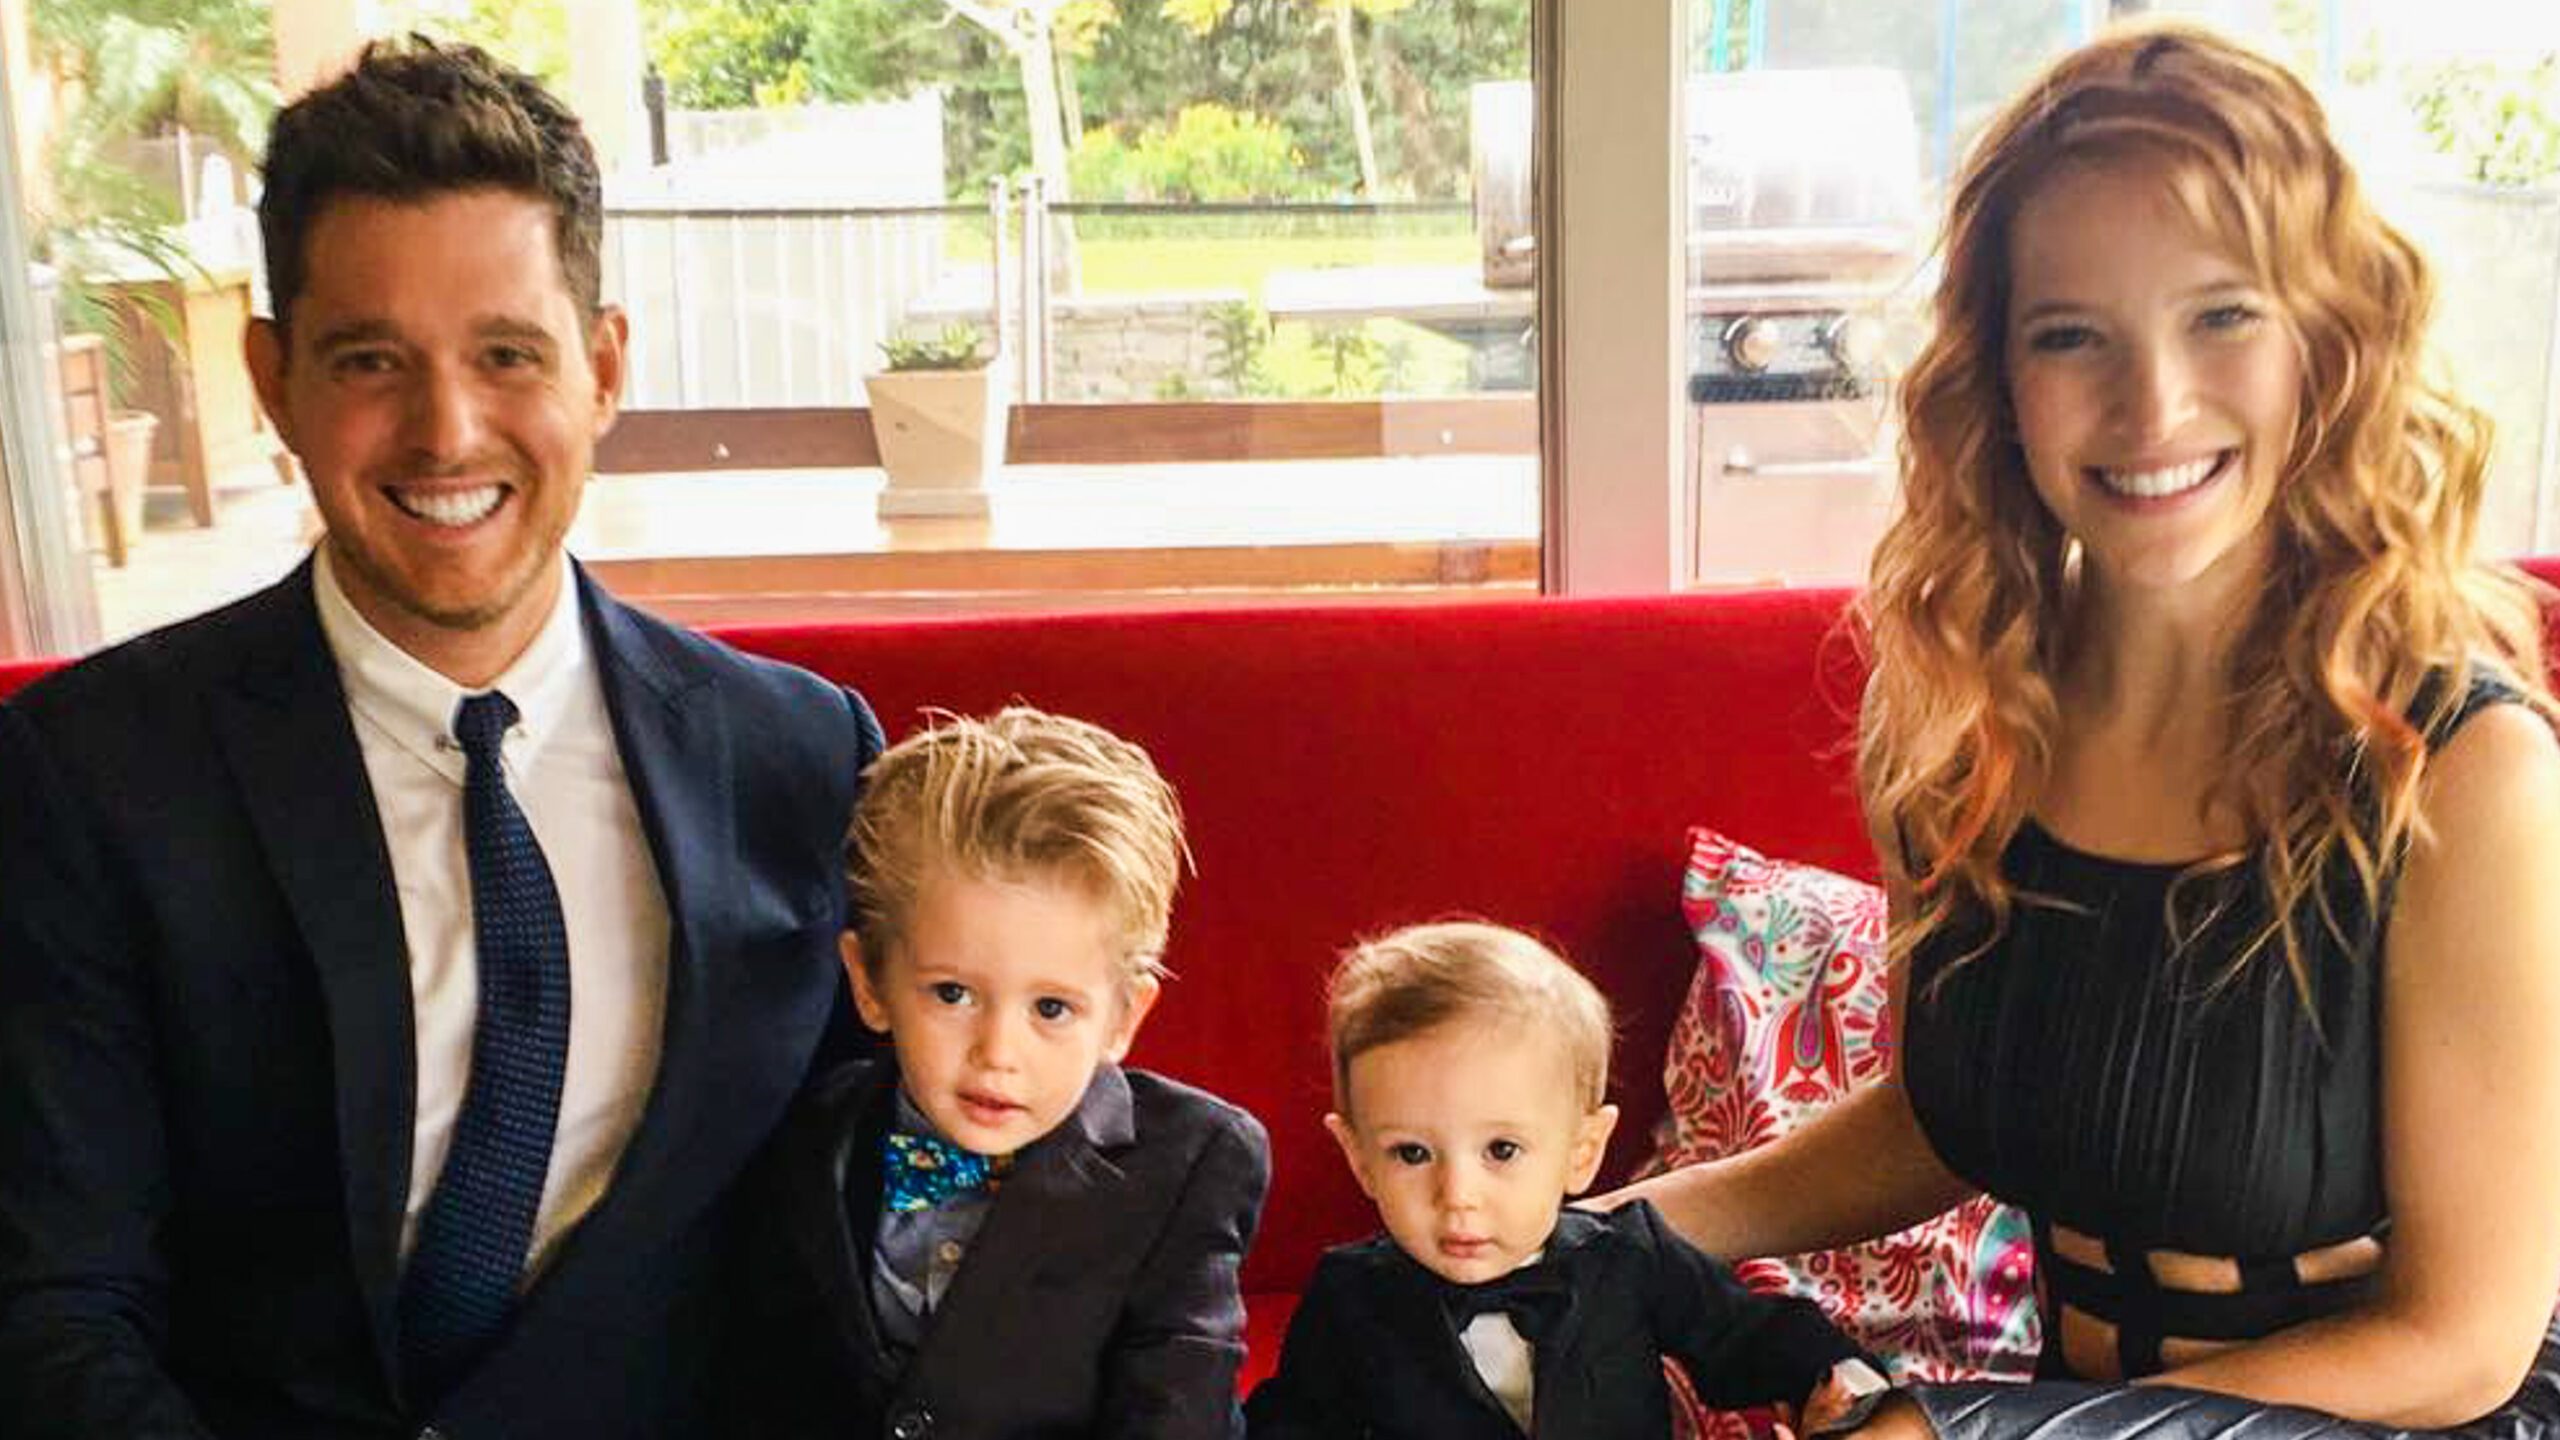 Michael Bublé, Luisana Lopilato’s 3-year-old son diagnosed with cancer